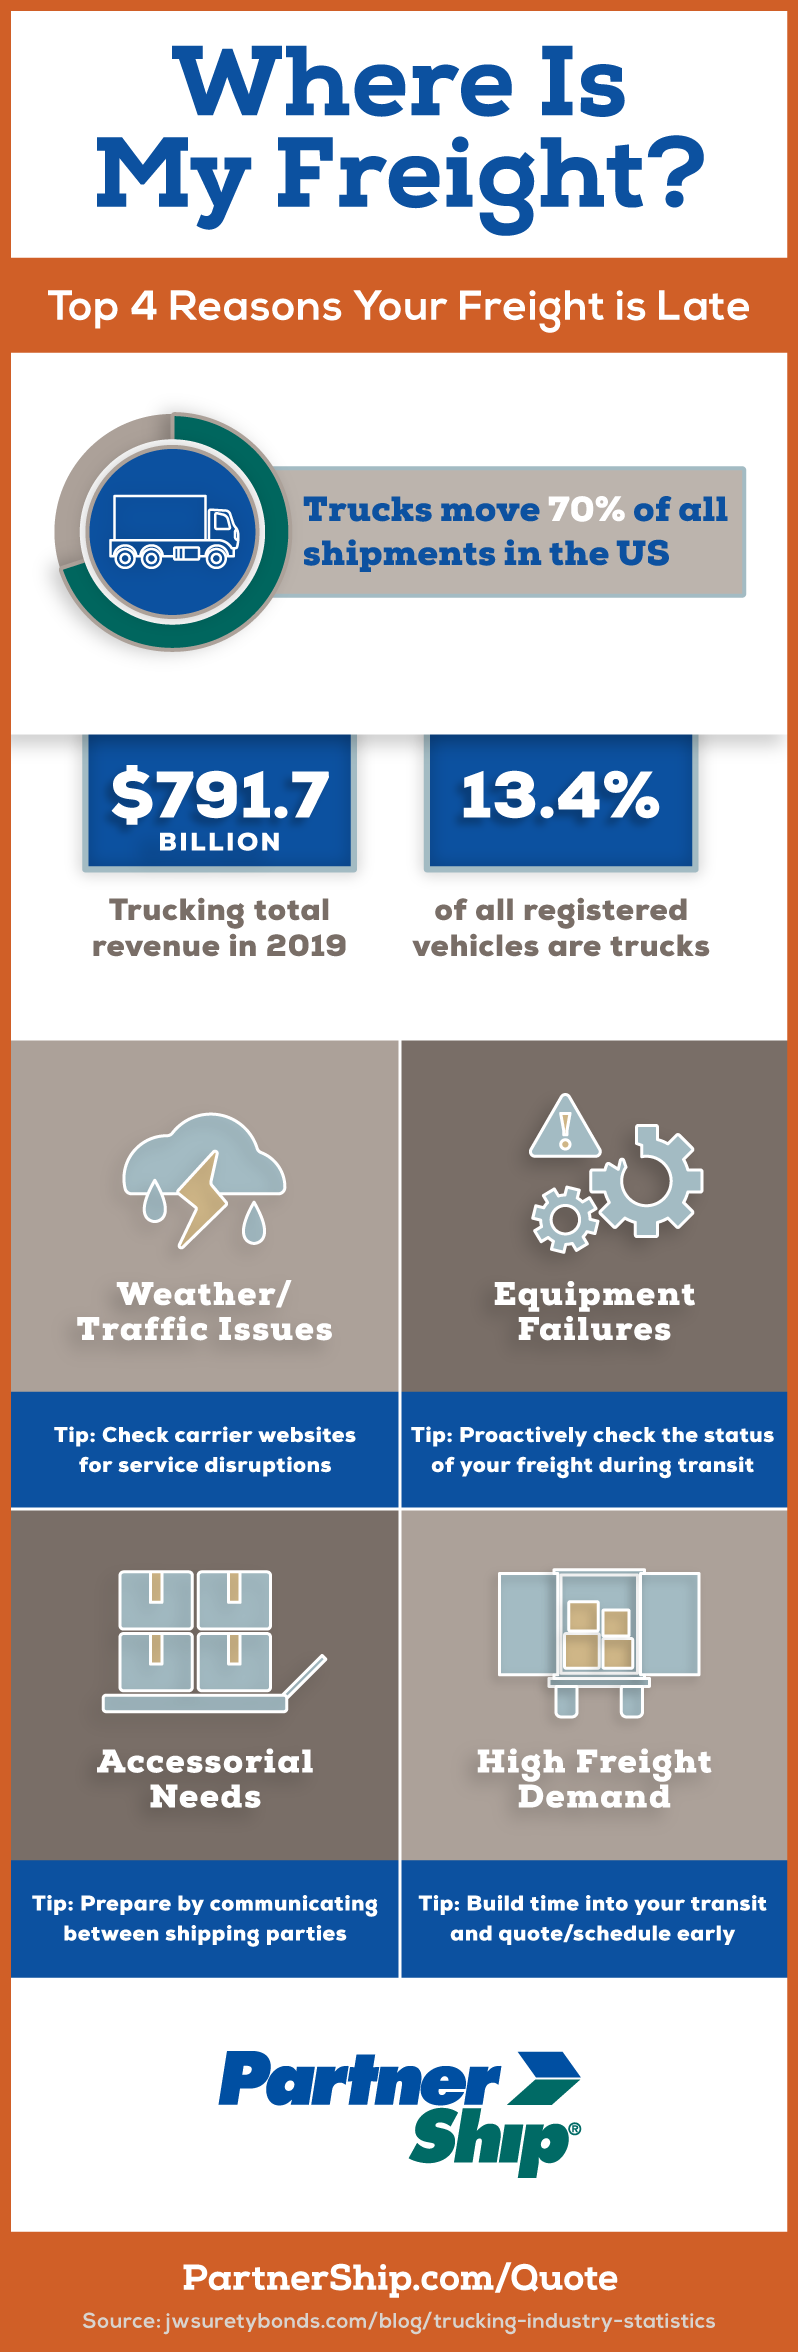 Freight Delay Infographic